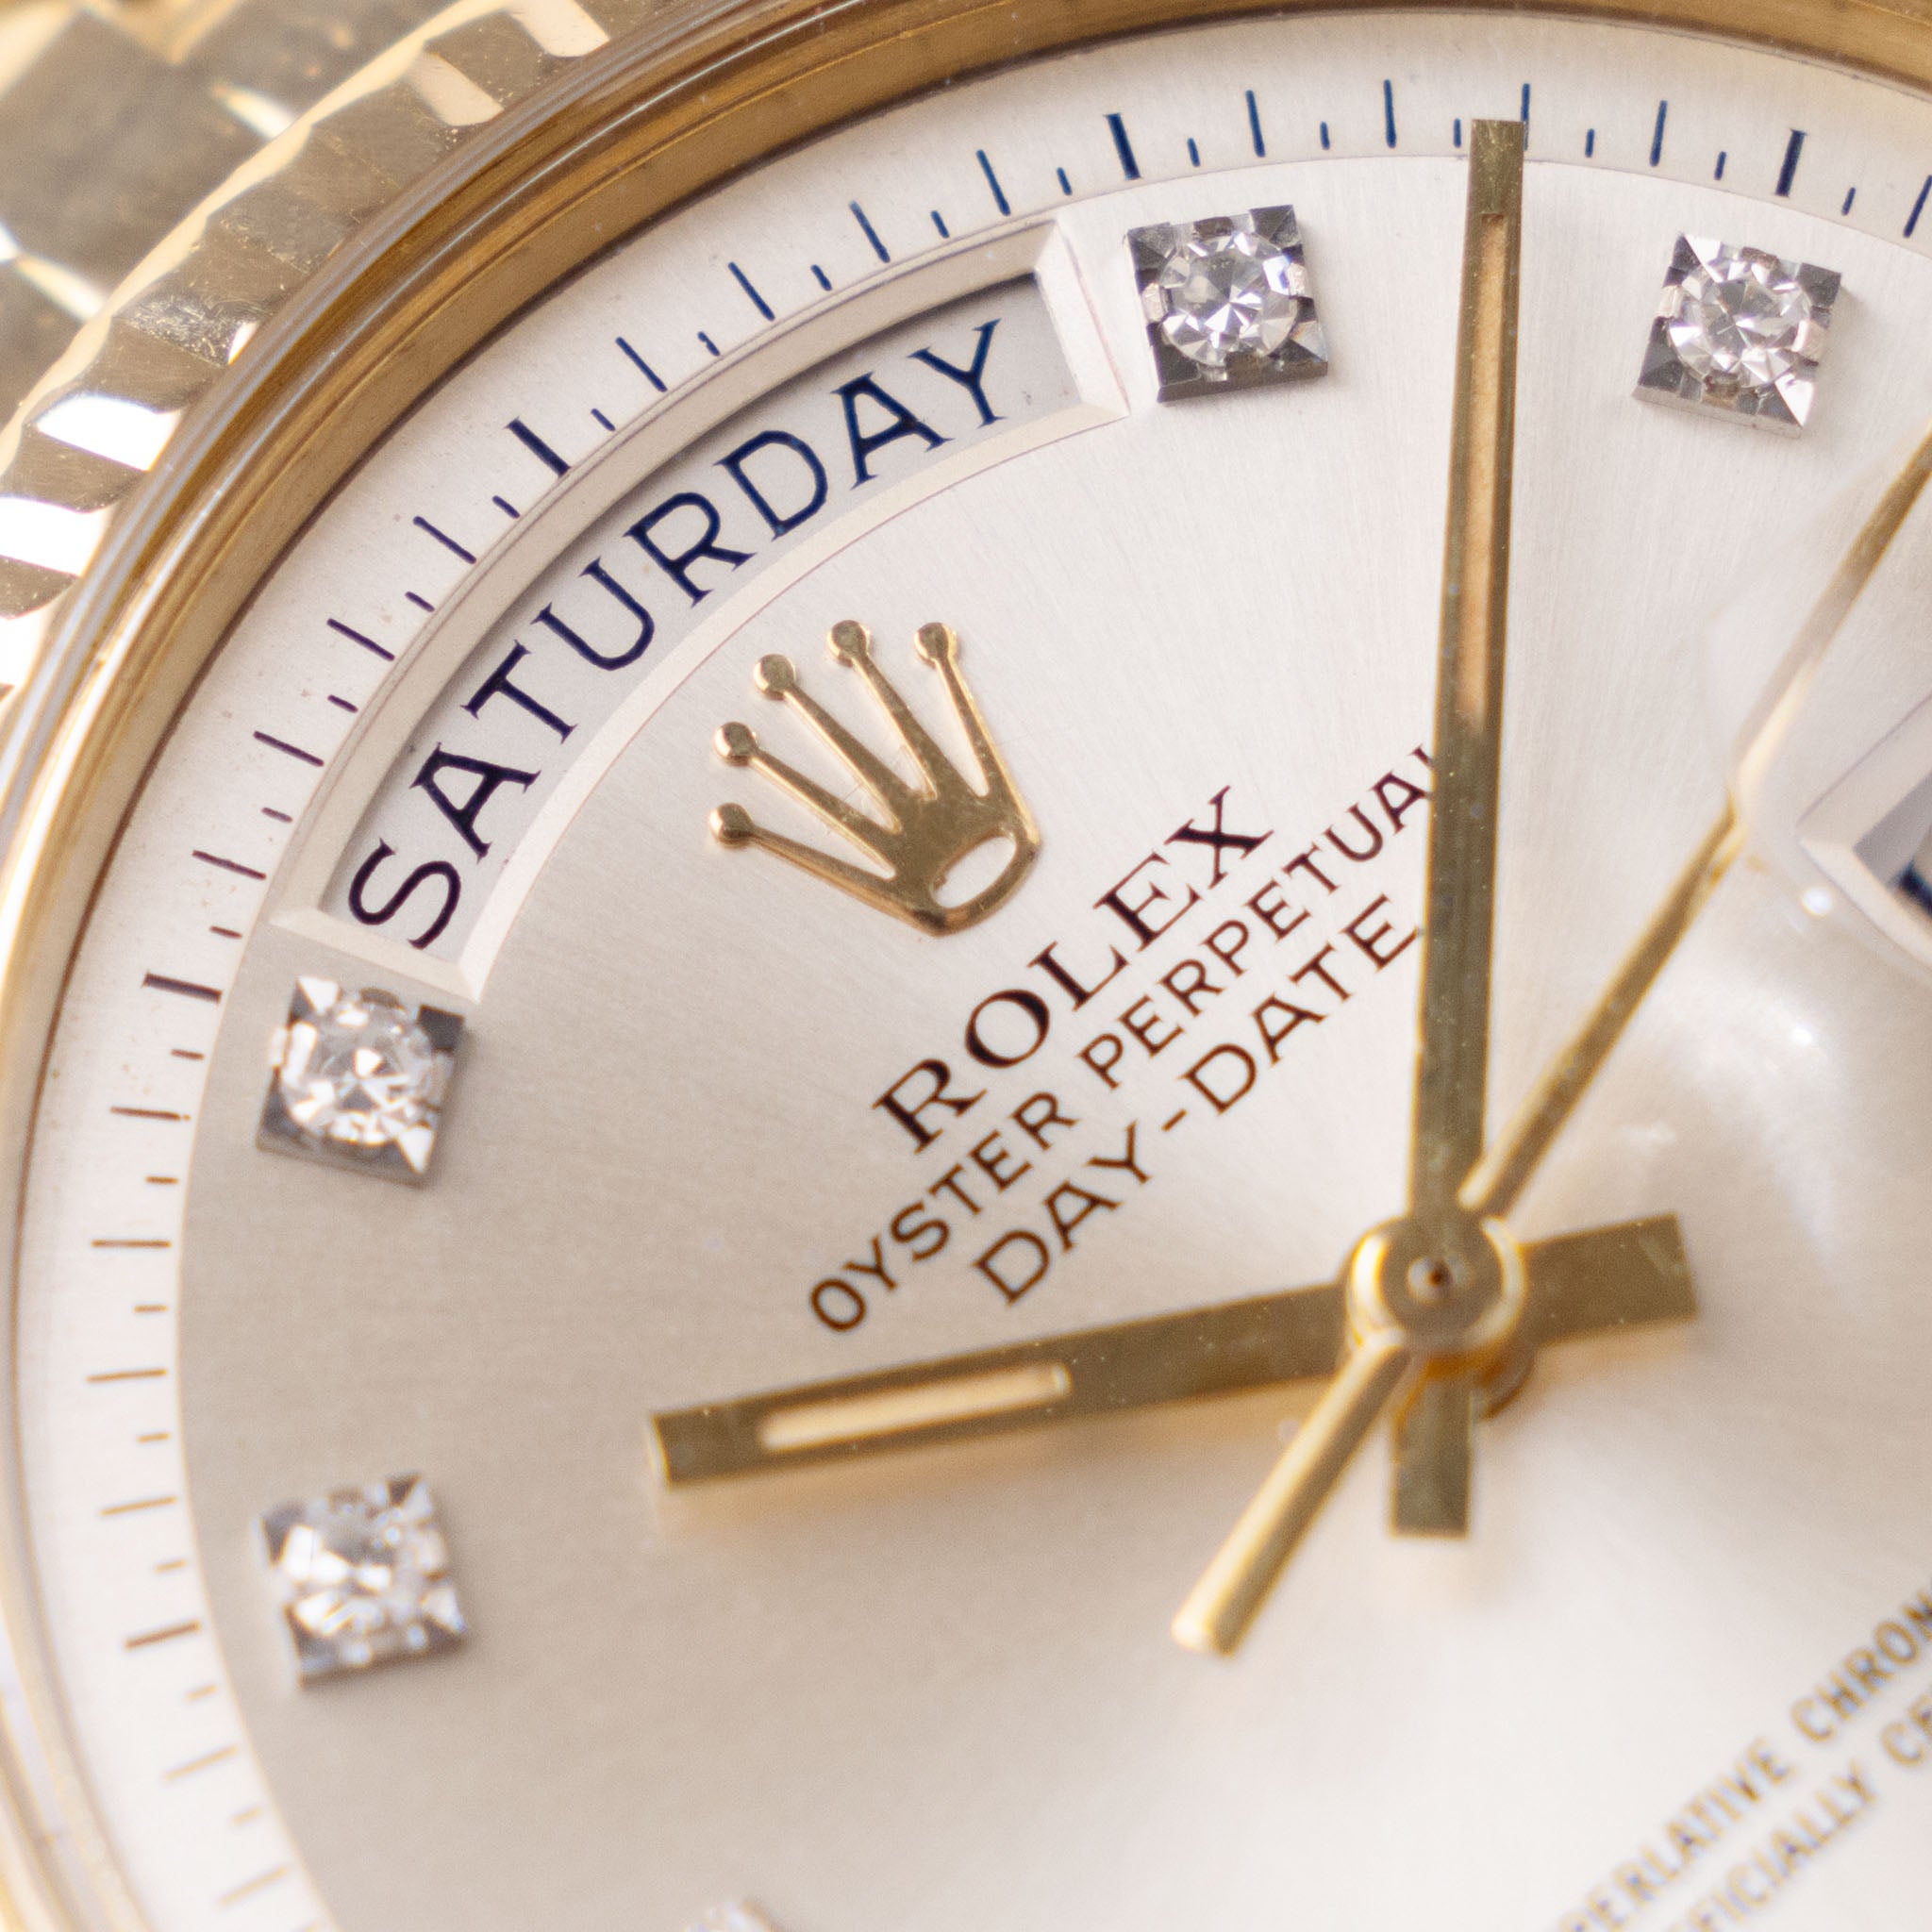 Rolex Day-Date Silver Diamond Hours Dial “Aramco” Ref 1803